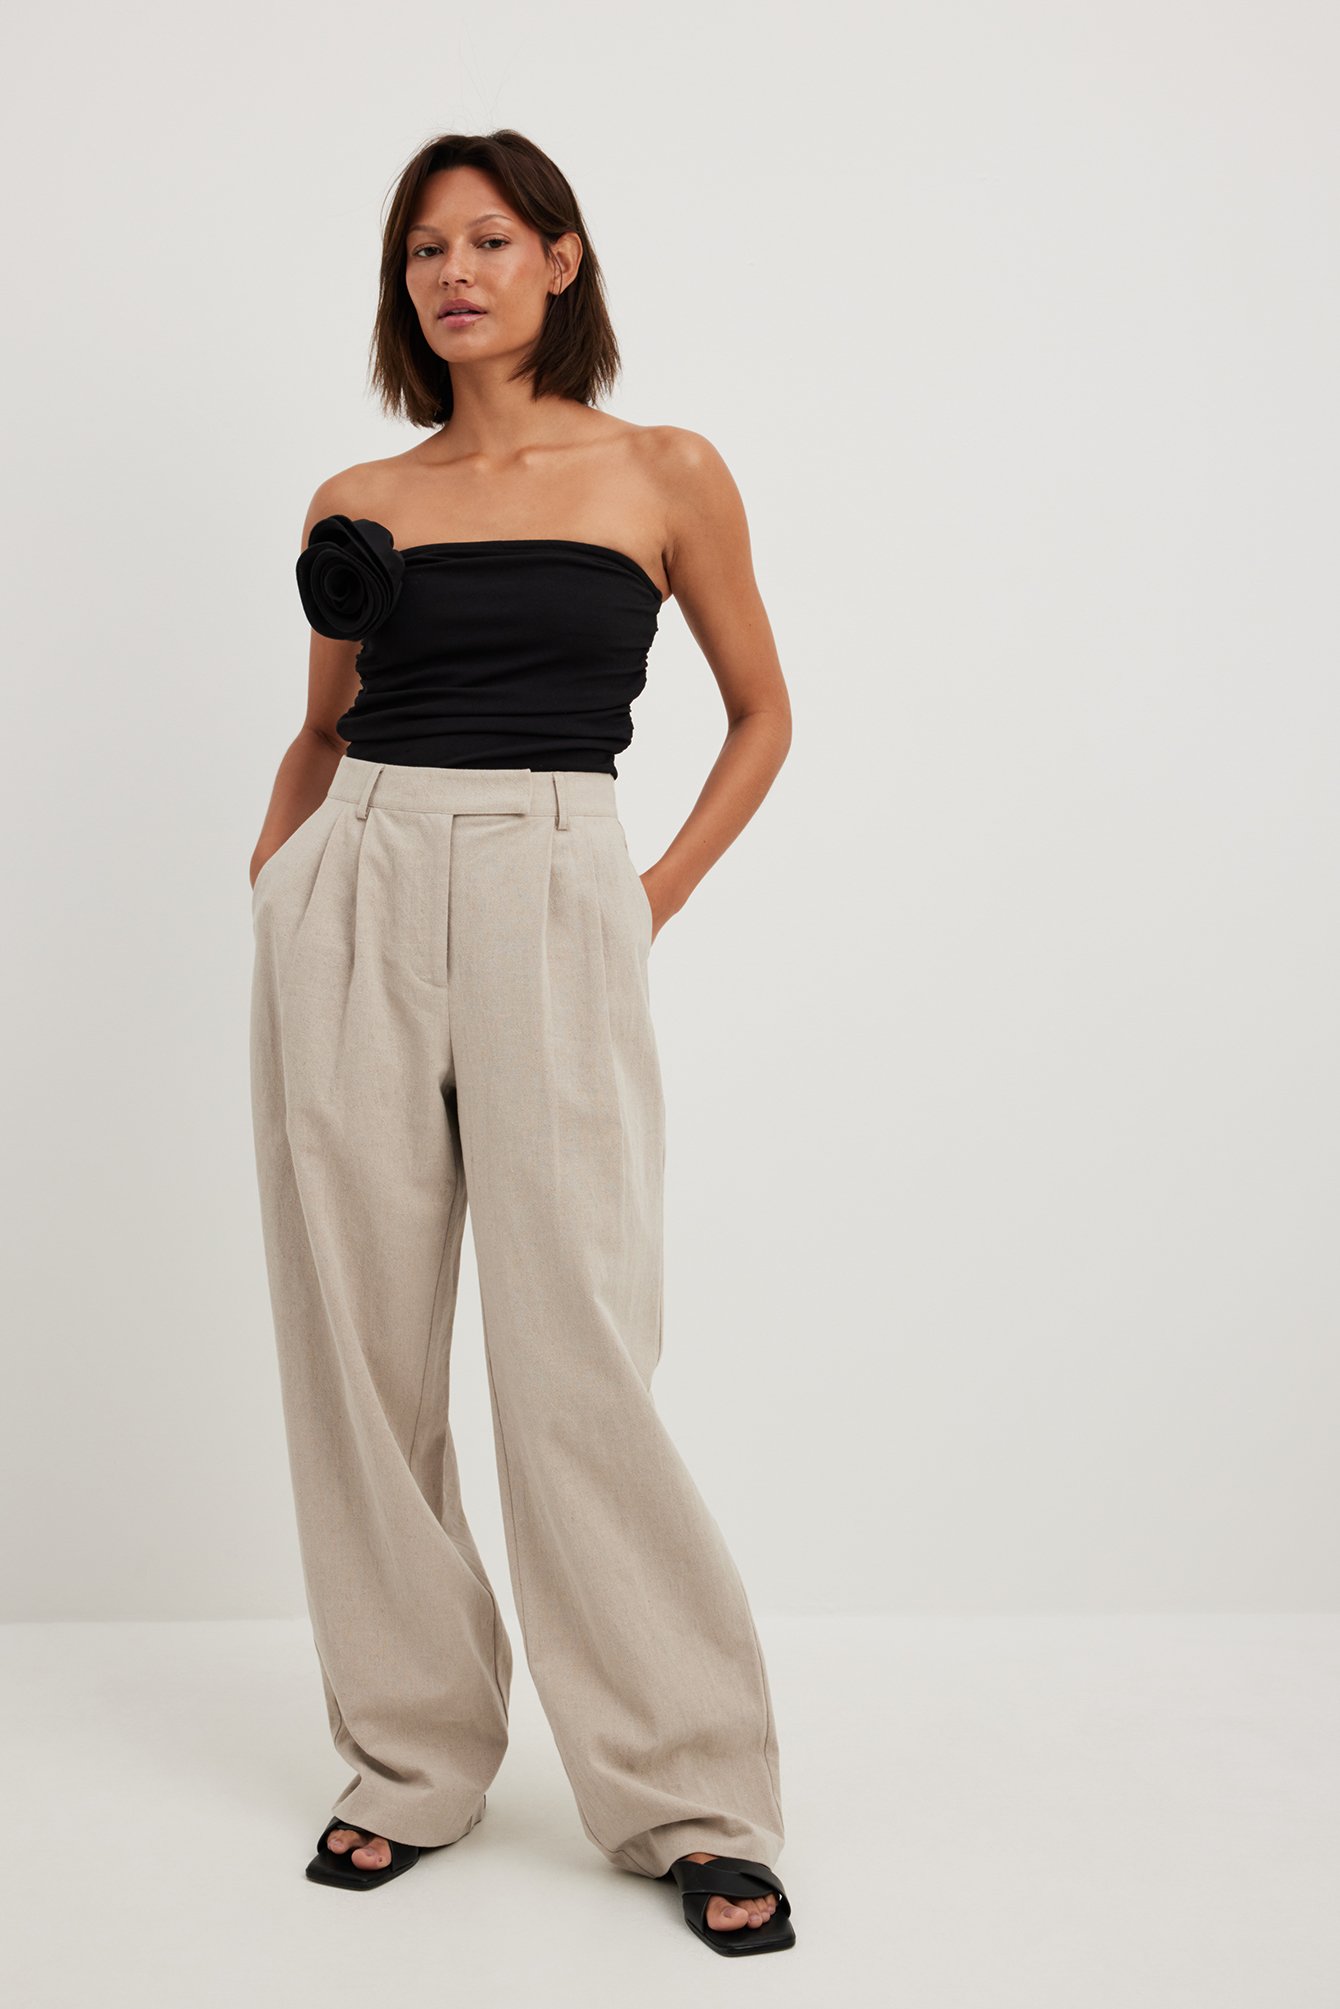 Pieces BARRY HIGH WAISTED TROUSERS  New In from Ruby Room UK